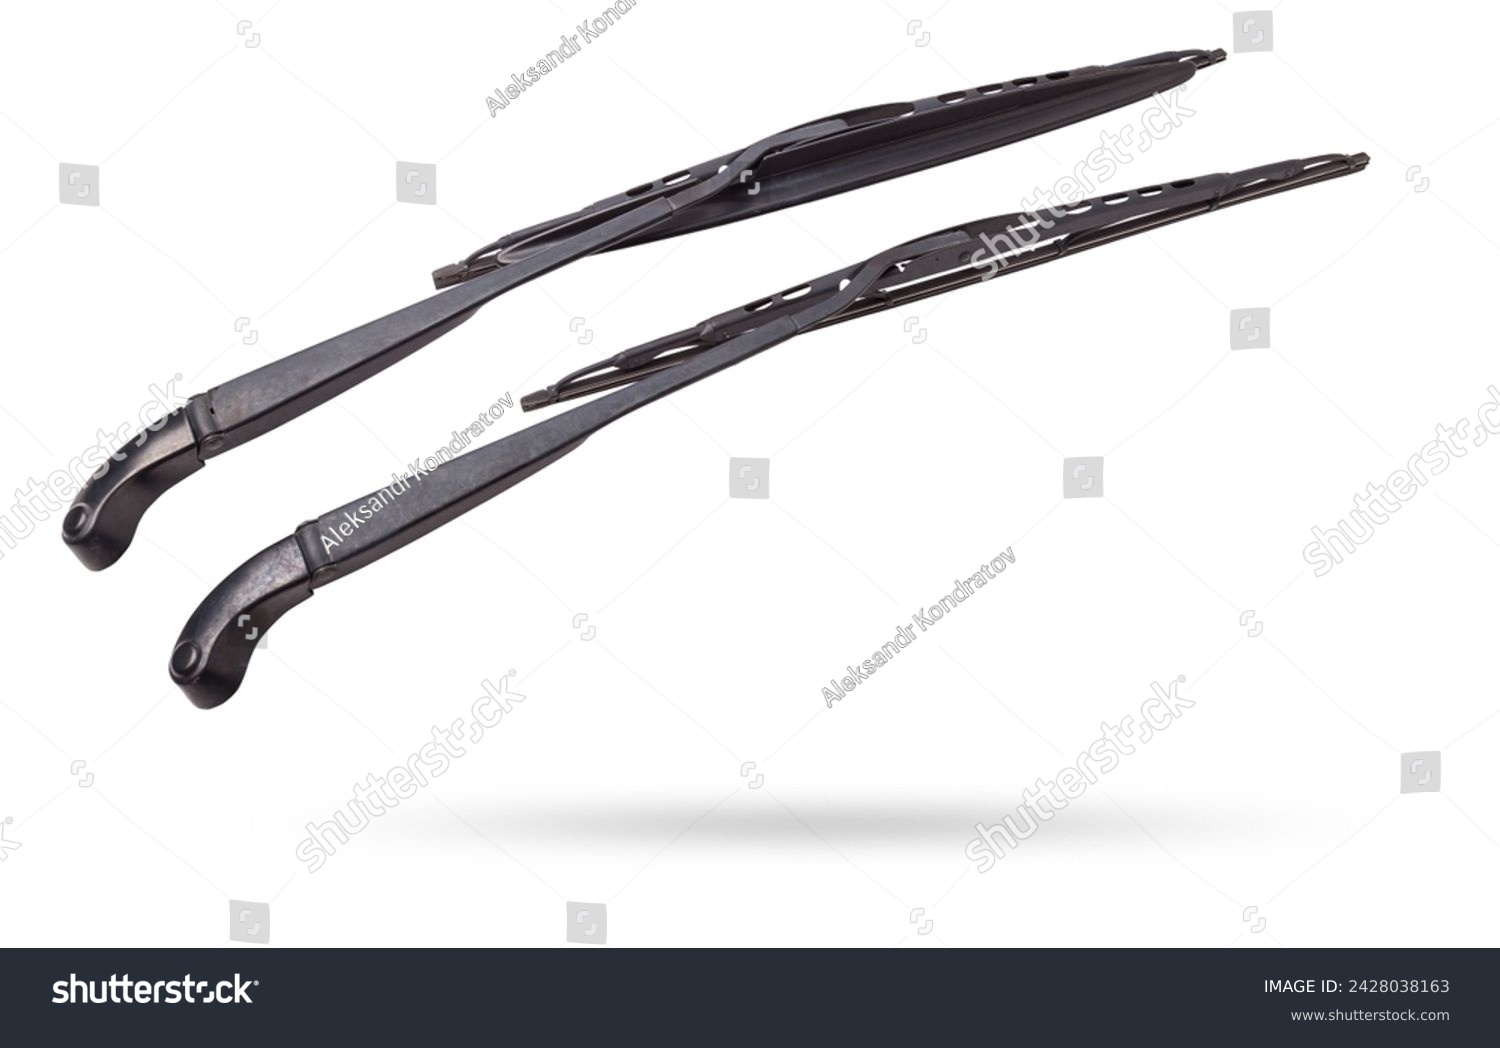 A pair of black plastic wipers on a white isolated background with rubber brushes for cleaning from dirt, dust or rain without hampering the driver's visibility. Spare part for the car at the parsing. #2428038163